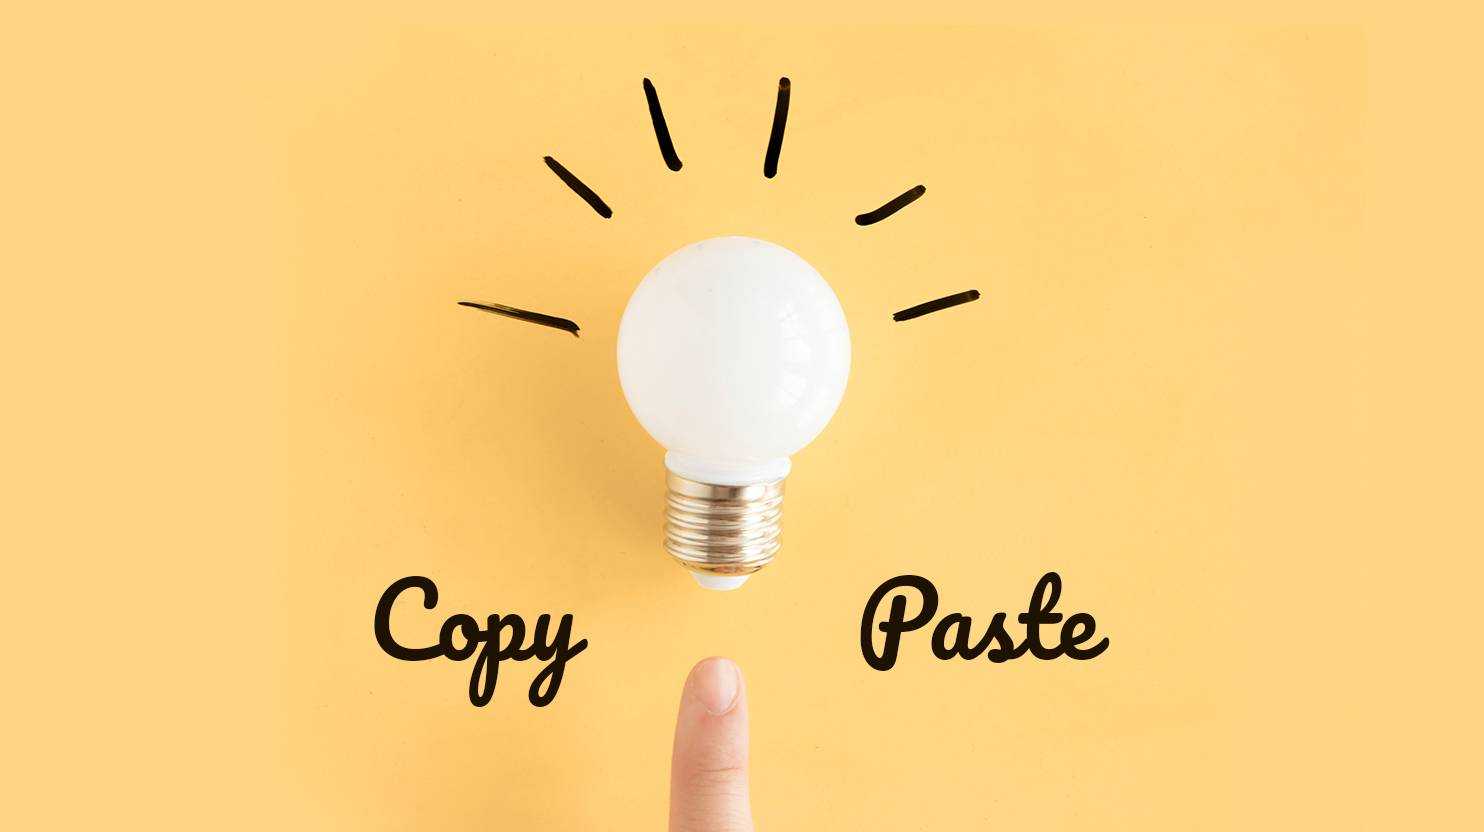 A lamp with "Copy" written to its left and "Paste" to its right